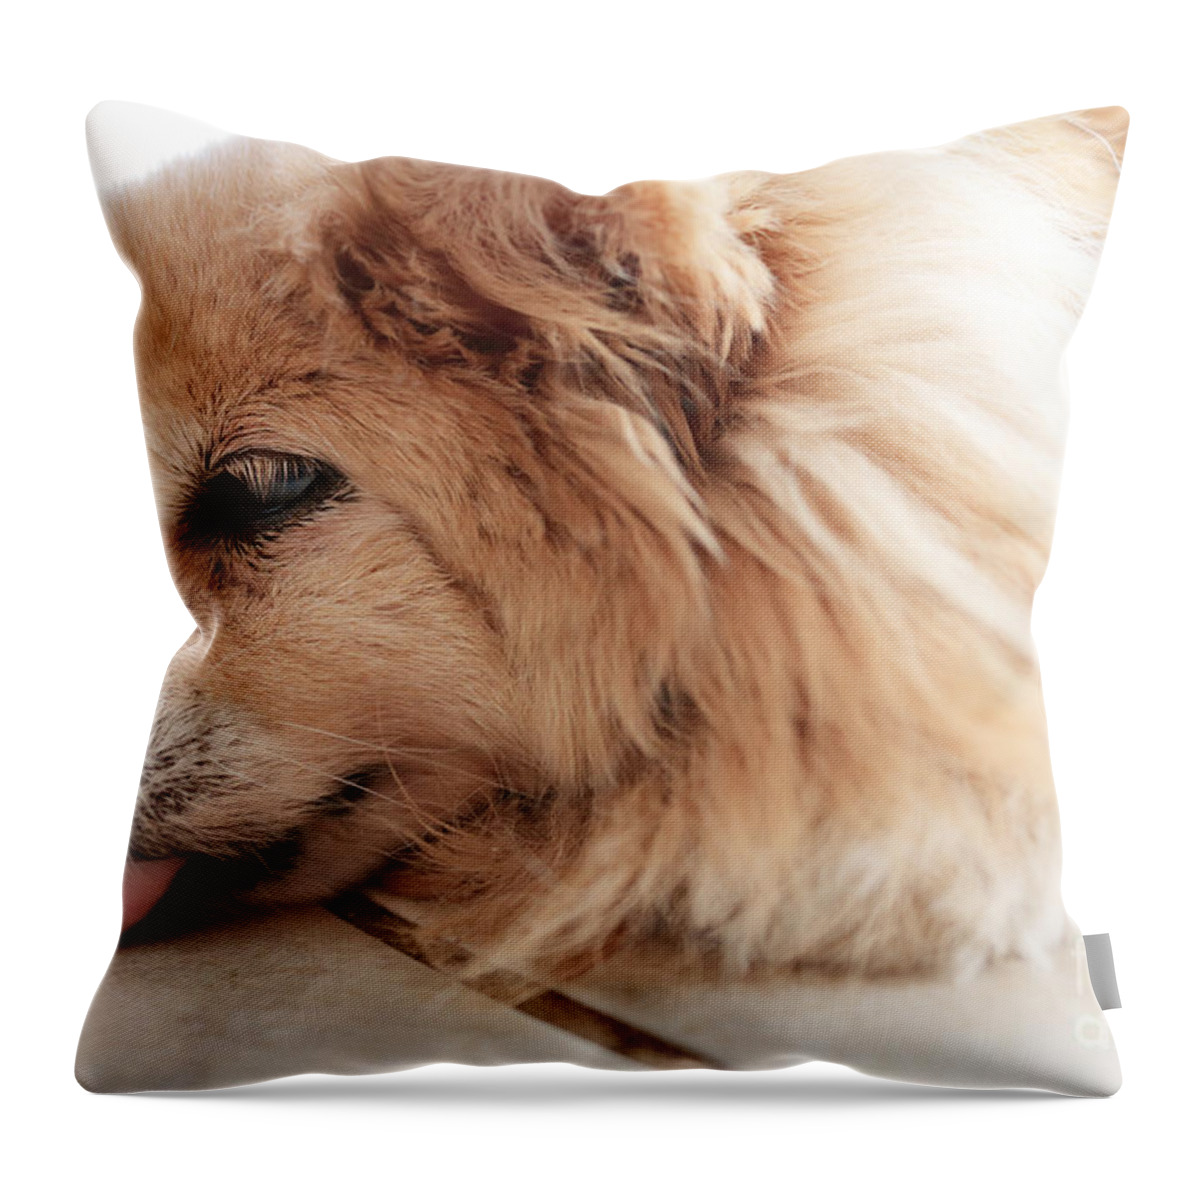 Dog Throw Pillow featuring the photograph Dog Nap by Charline Xia